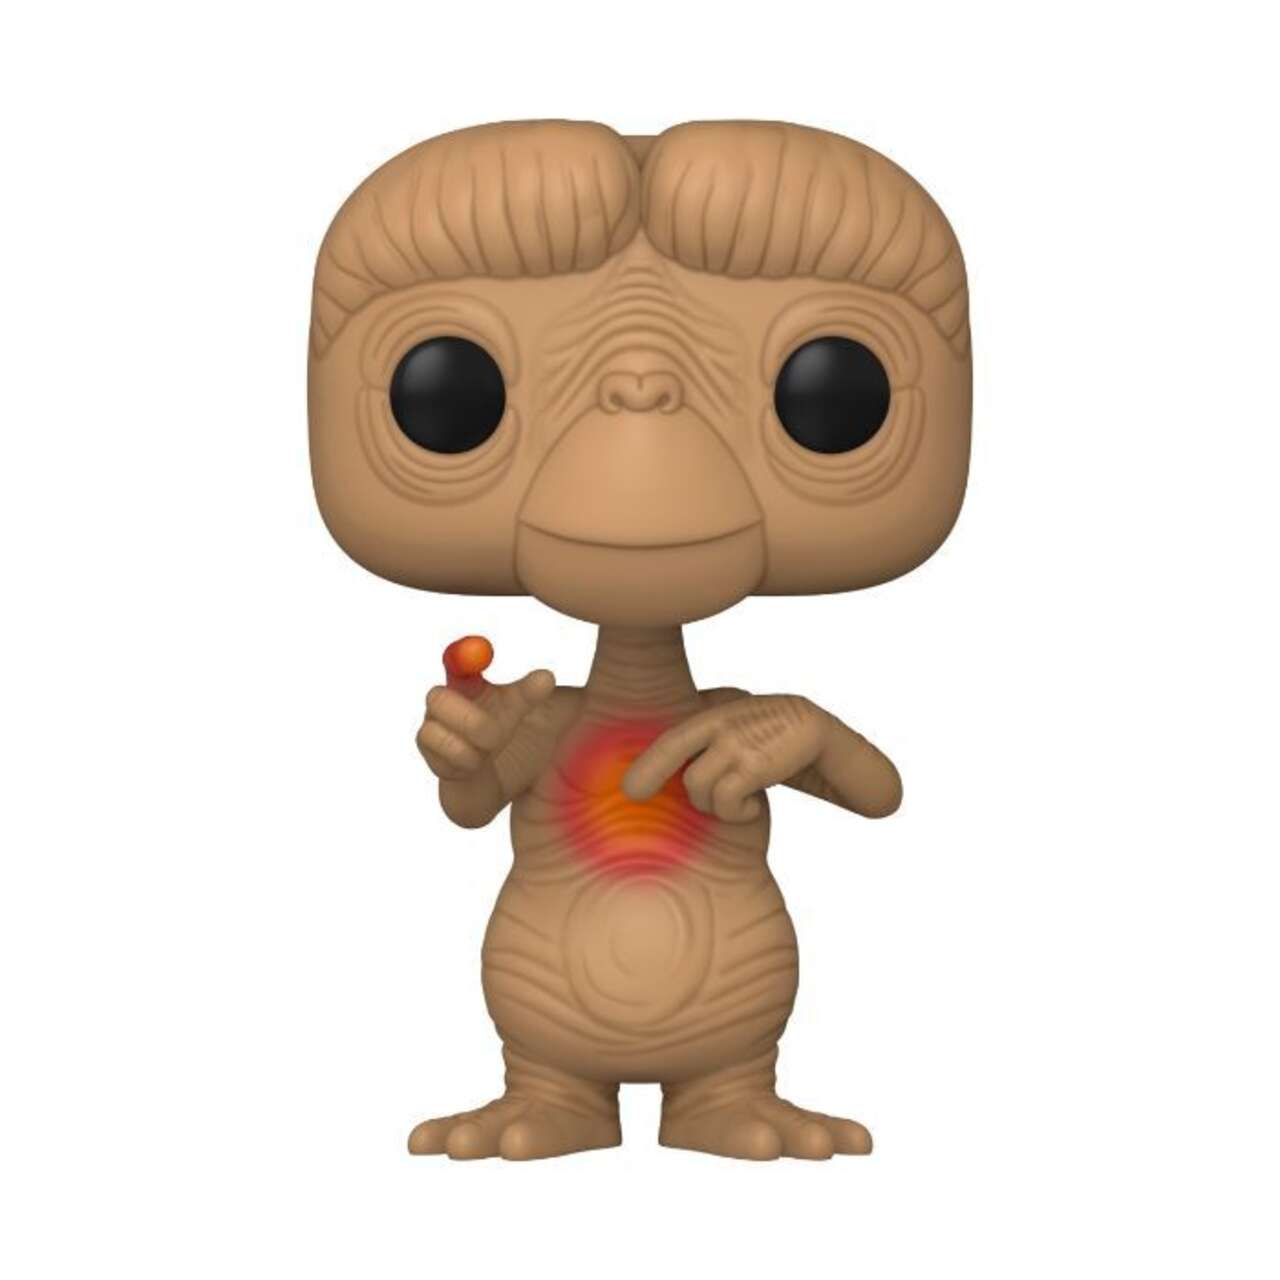 Exclusive: Check Out These New Funko Pops For ET's 40th Anniversary